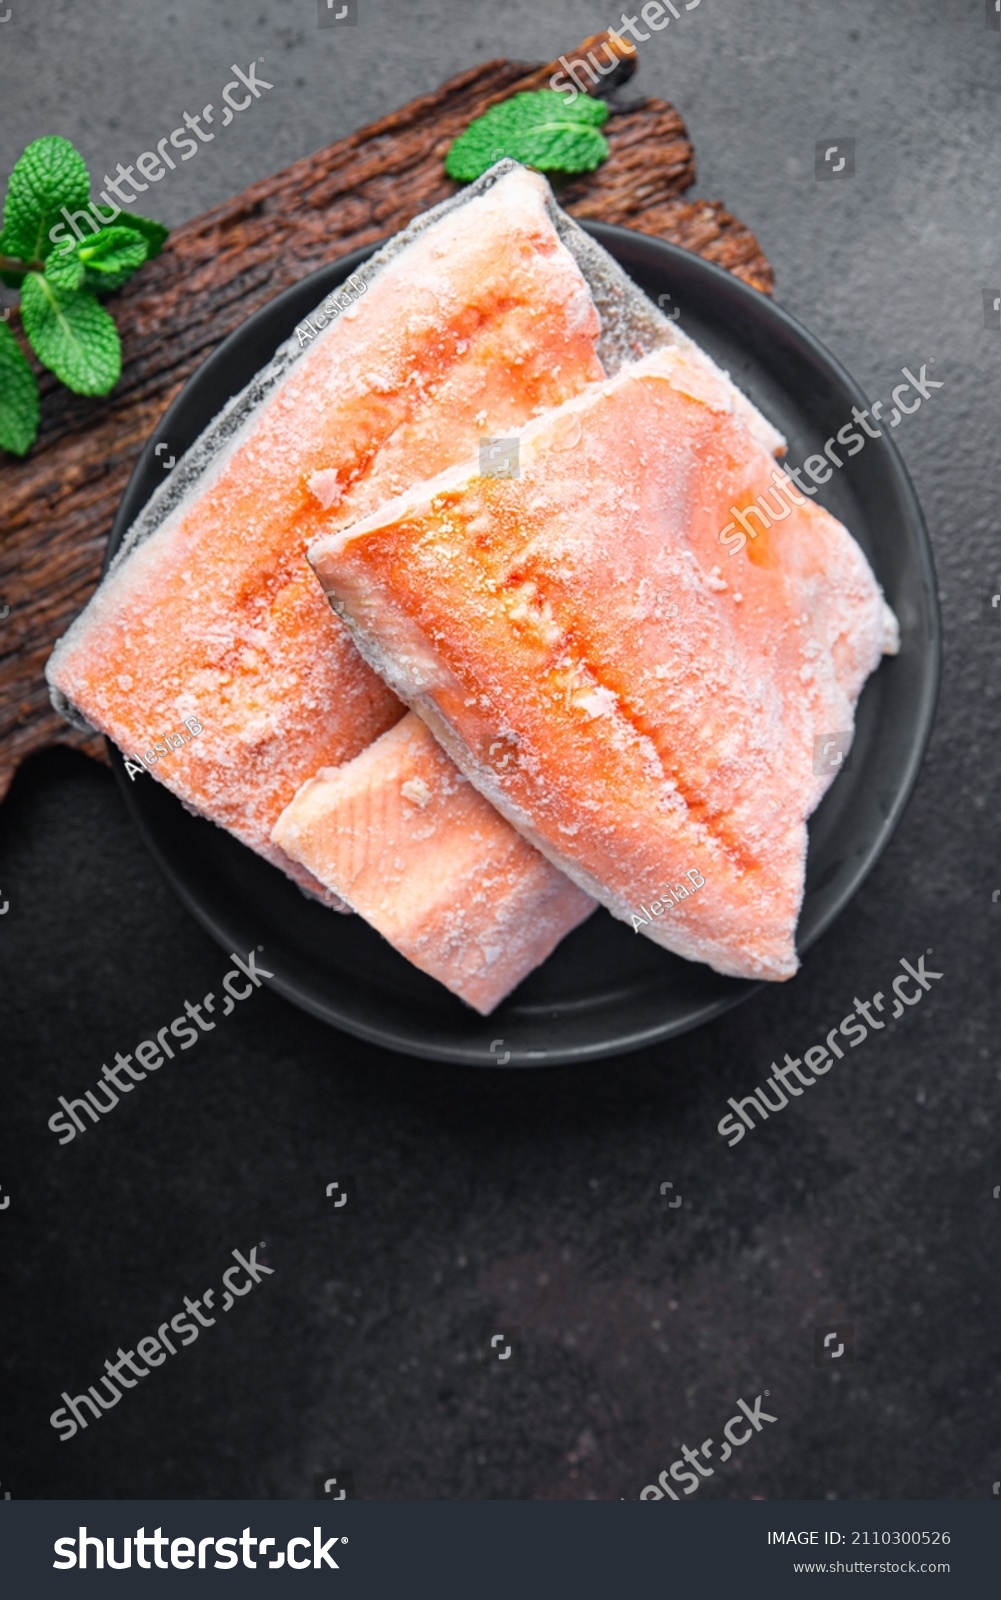 char fish frozen raw seafood freezy cooking red fish pieces long-term storage healthy meal food snack on the table copy space food background rustic top view pescatarian diet #2110300526